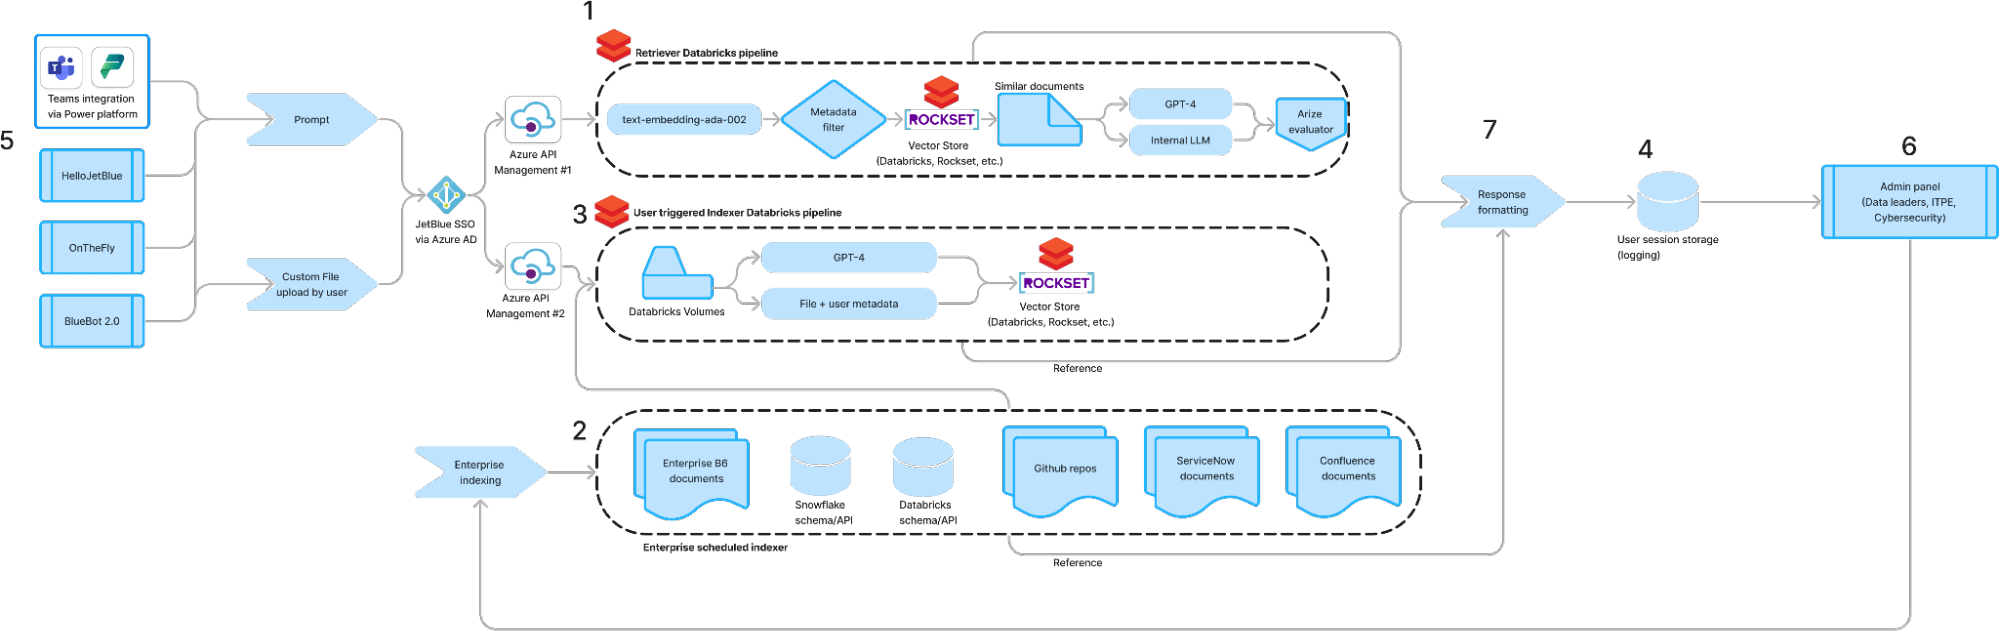 Figure 6. Using Databricks’ solutions, JetBlue’s complete chatbot architecture makes use of custom document uploads with different user groups